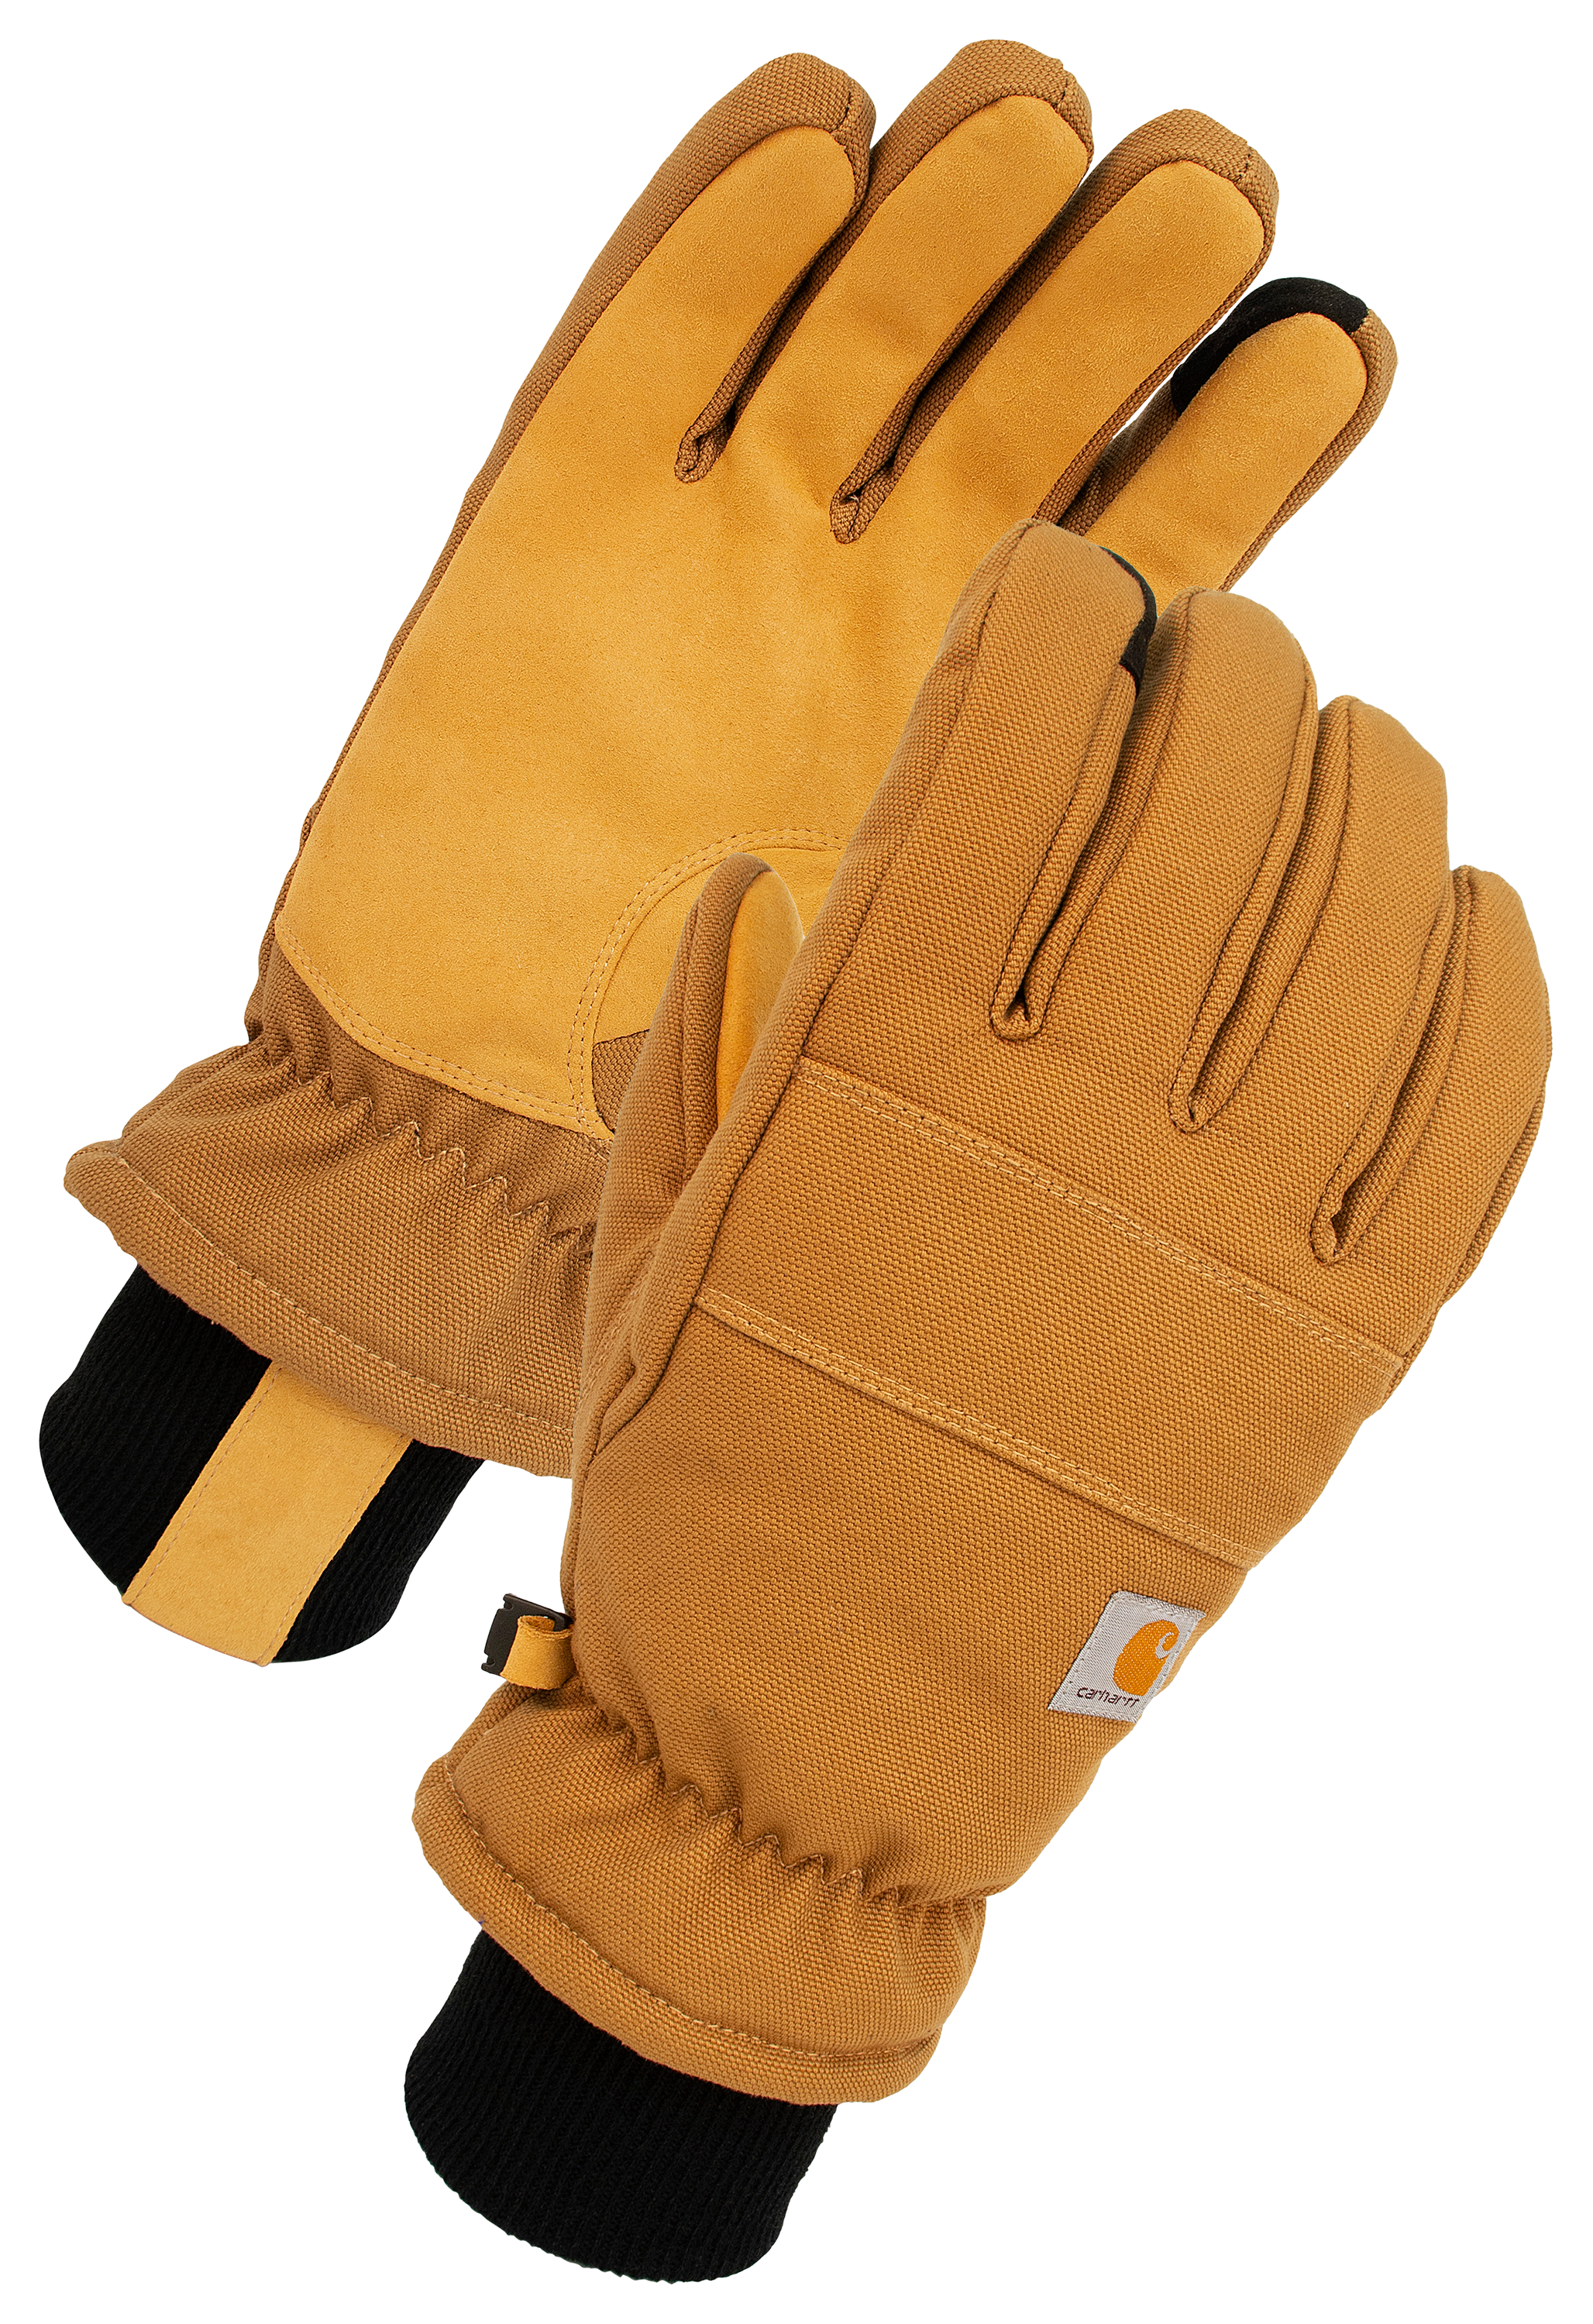 Carhartt Insulated Duck Synthetic Leather Knit Cuff Gloves for Men - Brown - M